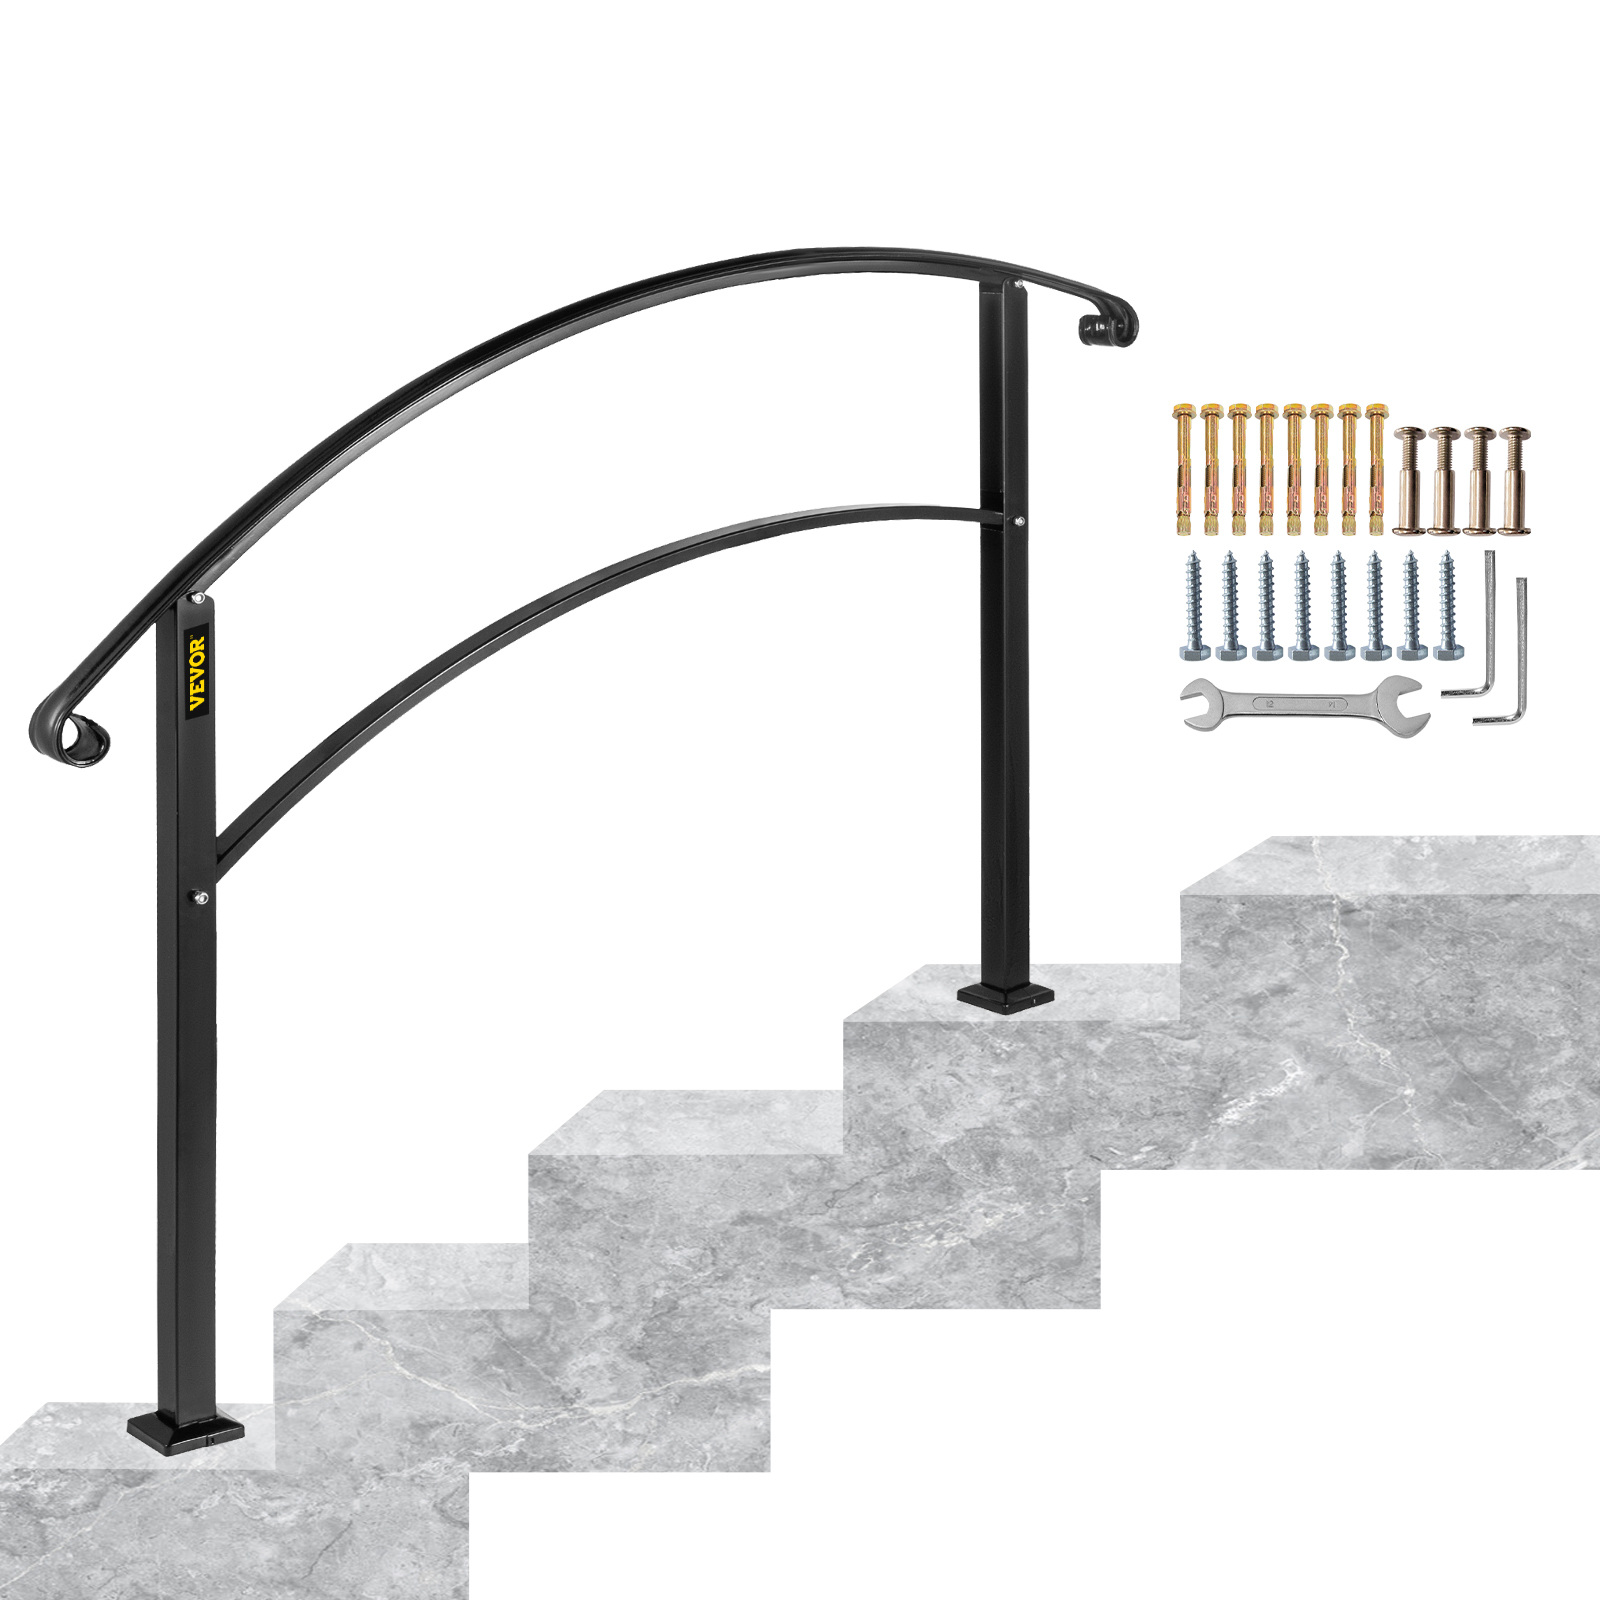 4ft Handrail Angle Adjustable Fits 3 Or 4 Steps Office Paver Step Iron от Vevor Many GEOs